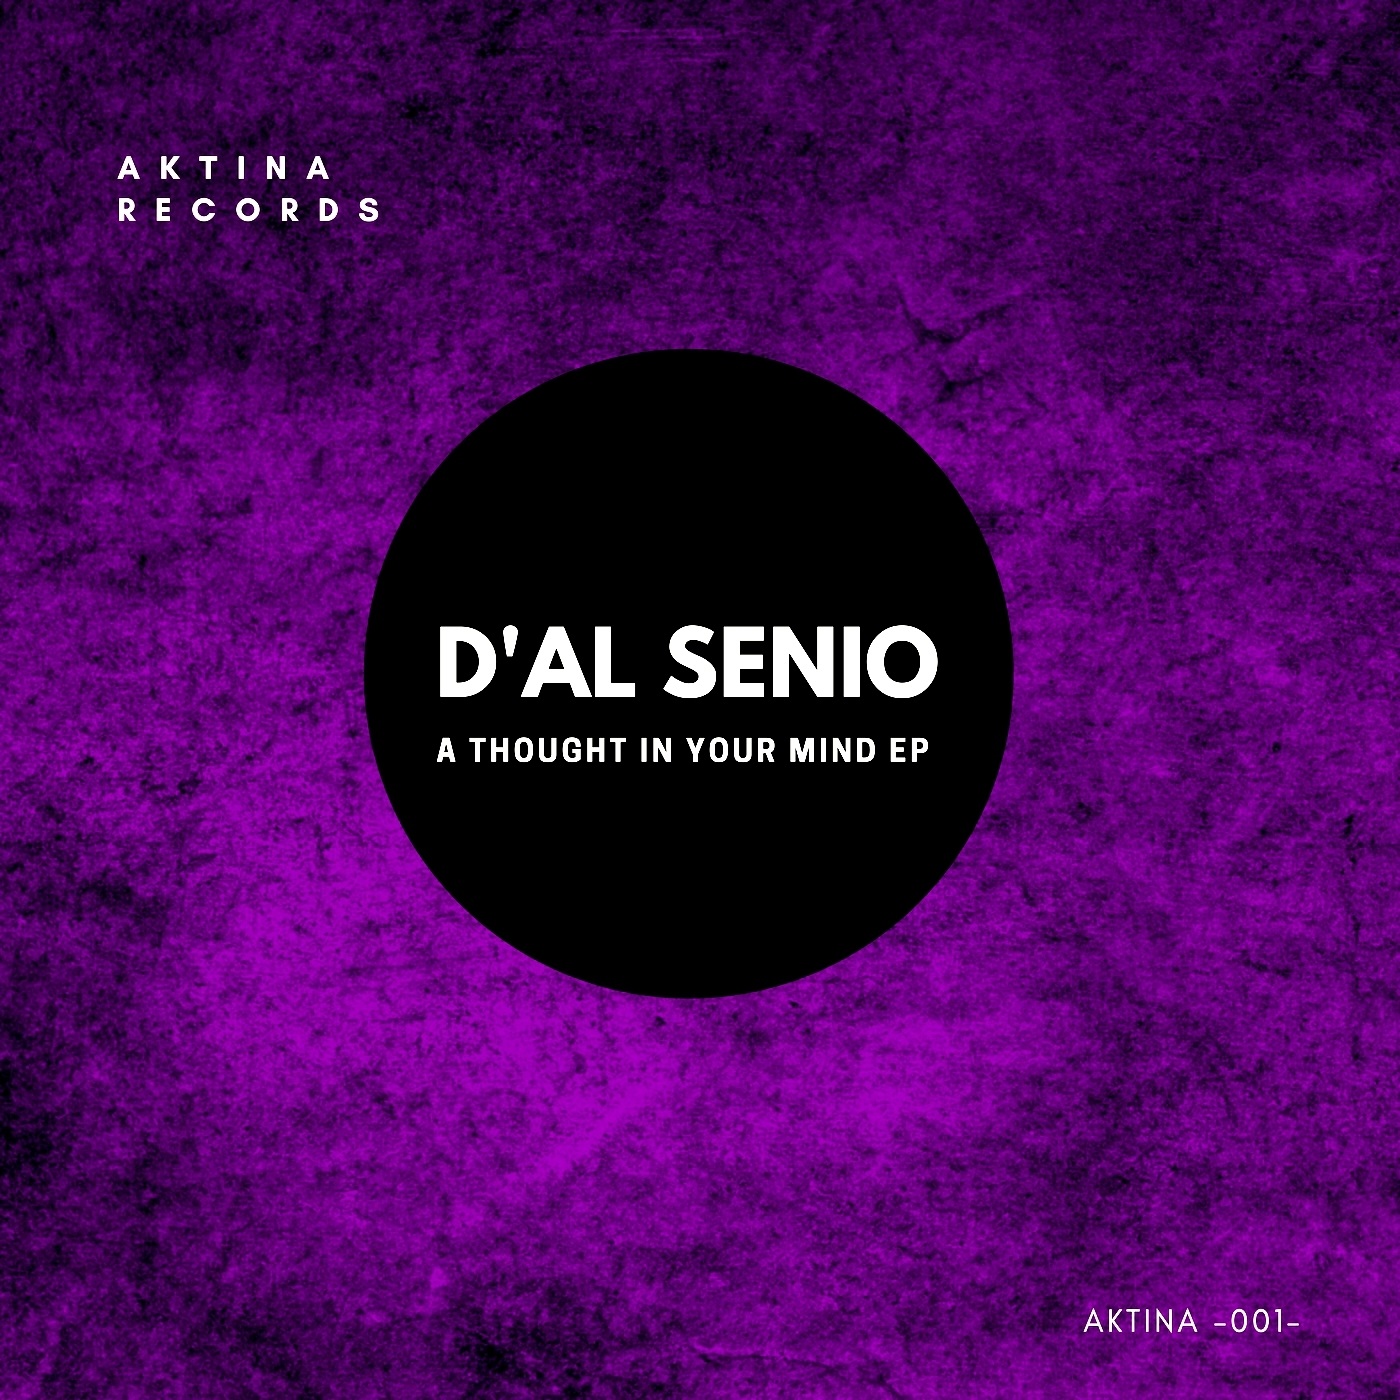 D'AL SENIO - A Thought in Your Mind / AktinA Records